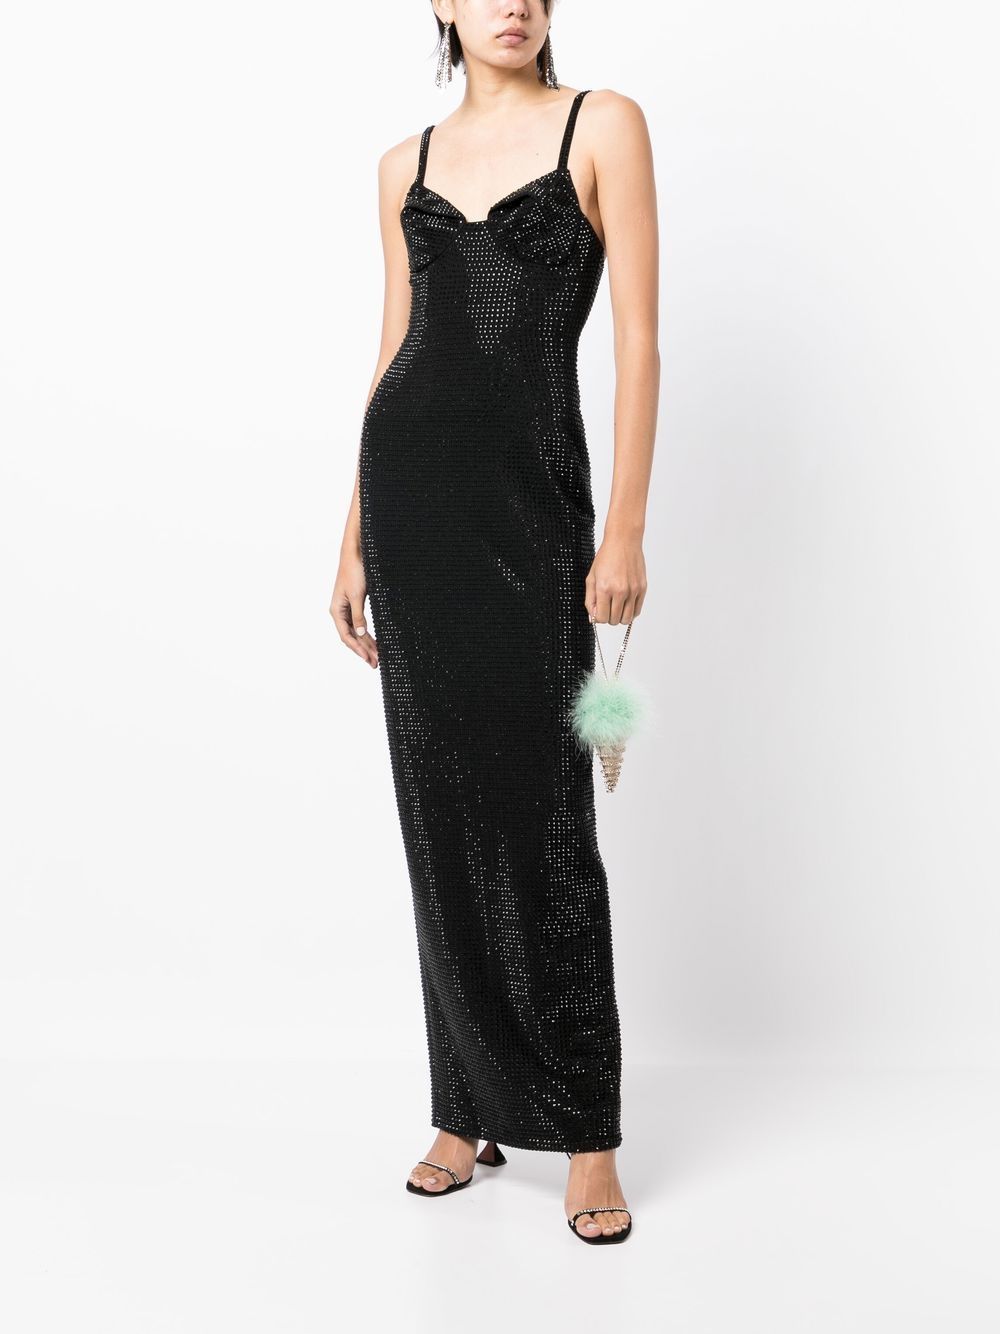 AREA crystal-embellished Evening Gown - Farfetch